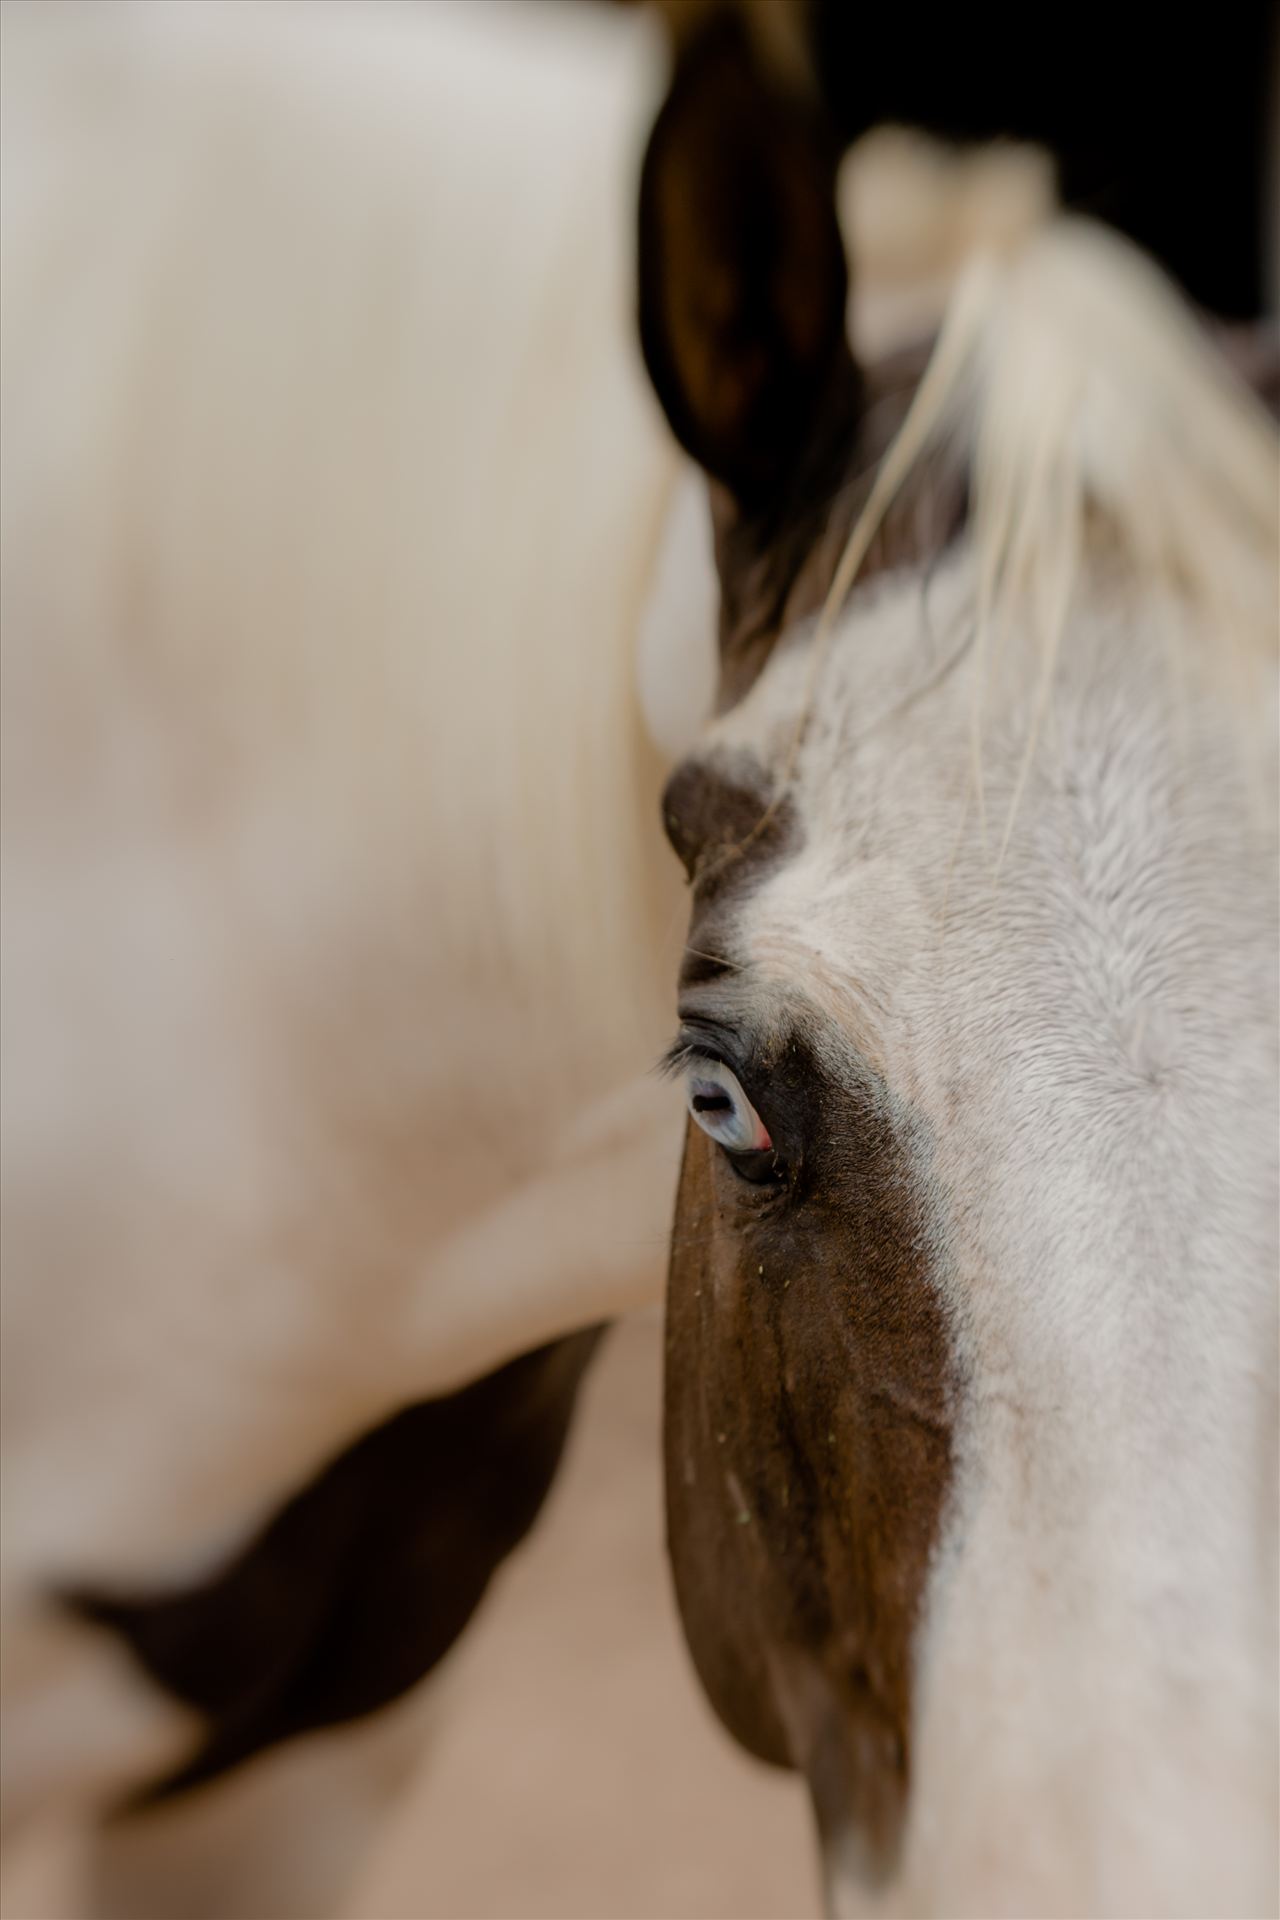 Blue Eyed Gal.jpg Blue eyed paint horse posing for the camera.  Focus on the eye and artistically softened in camera to highlight patterns. by Sarah Williams